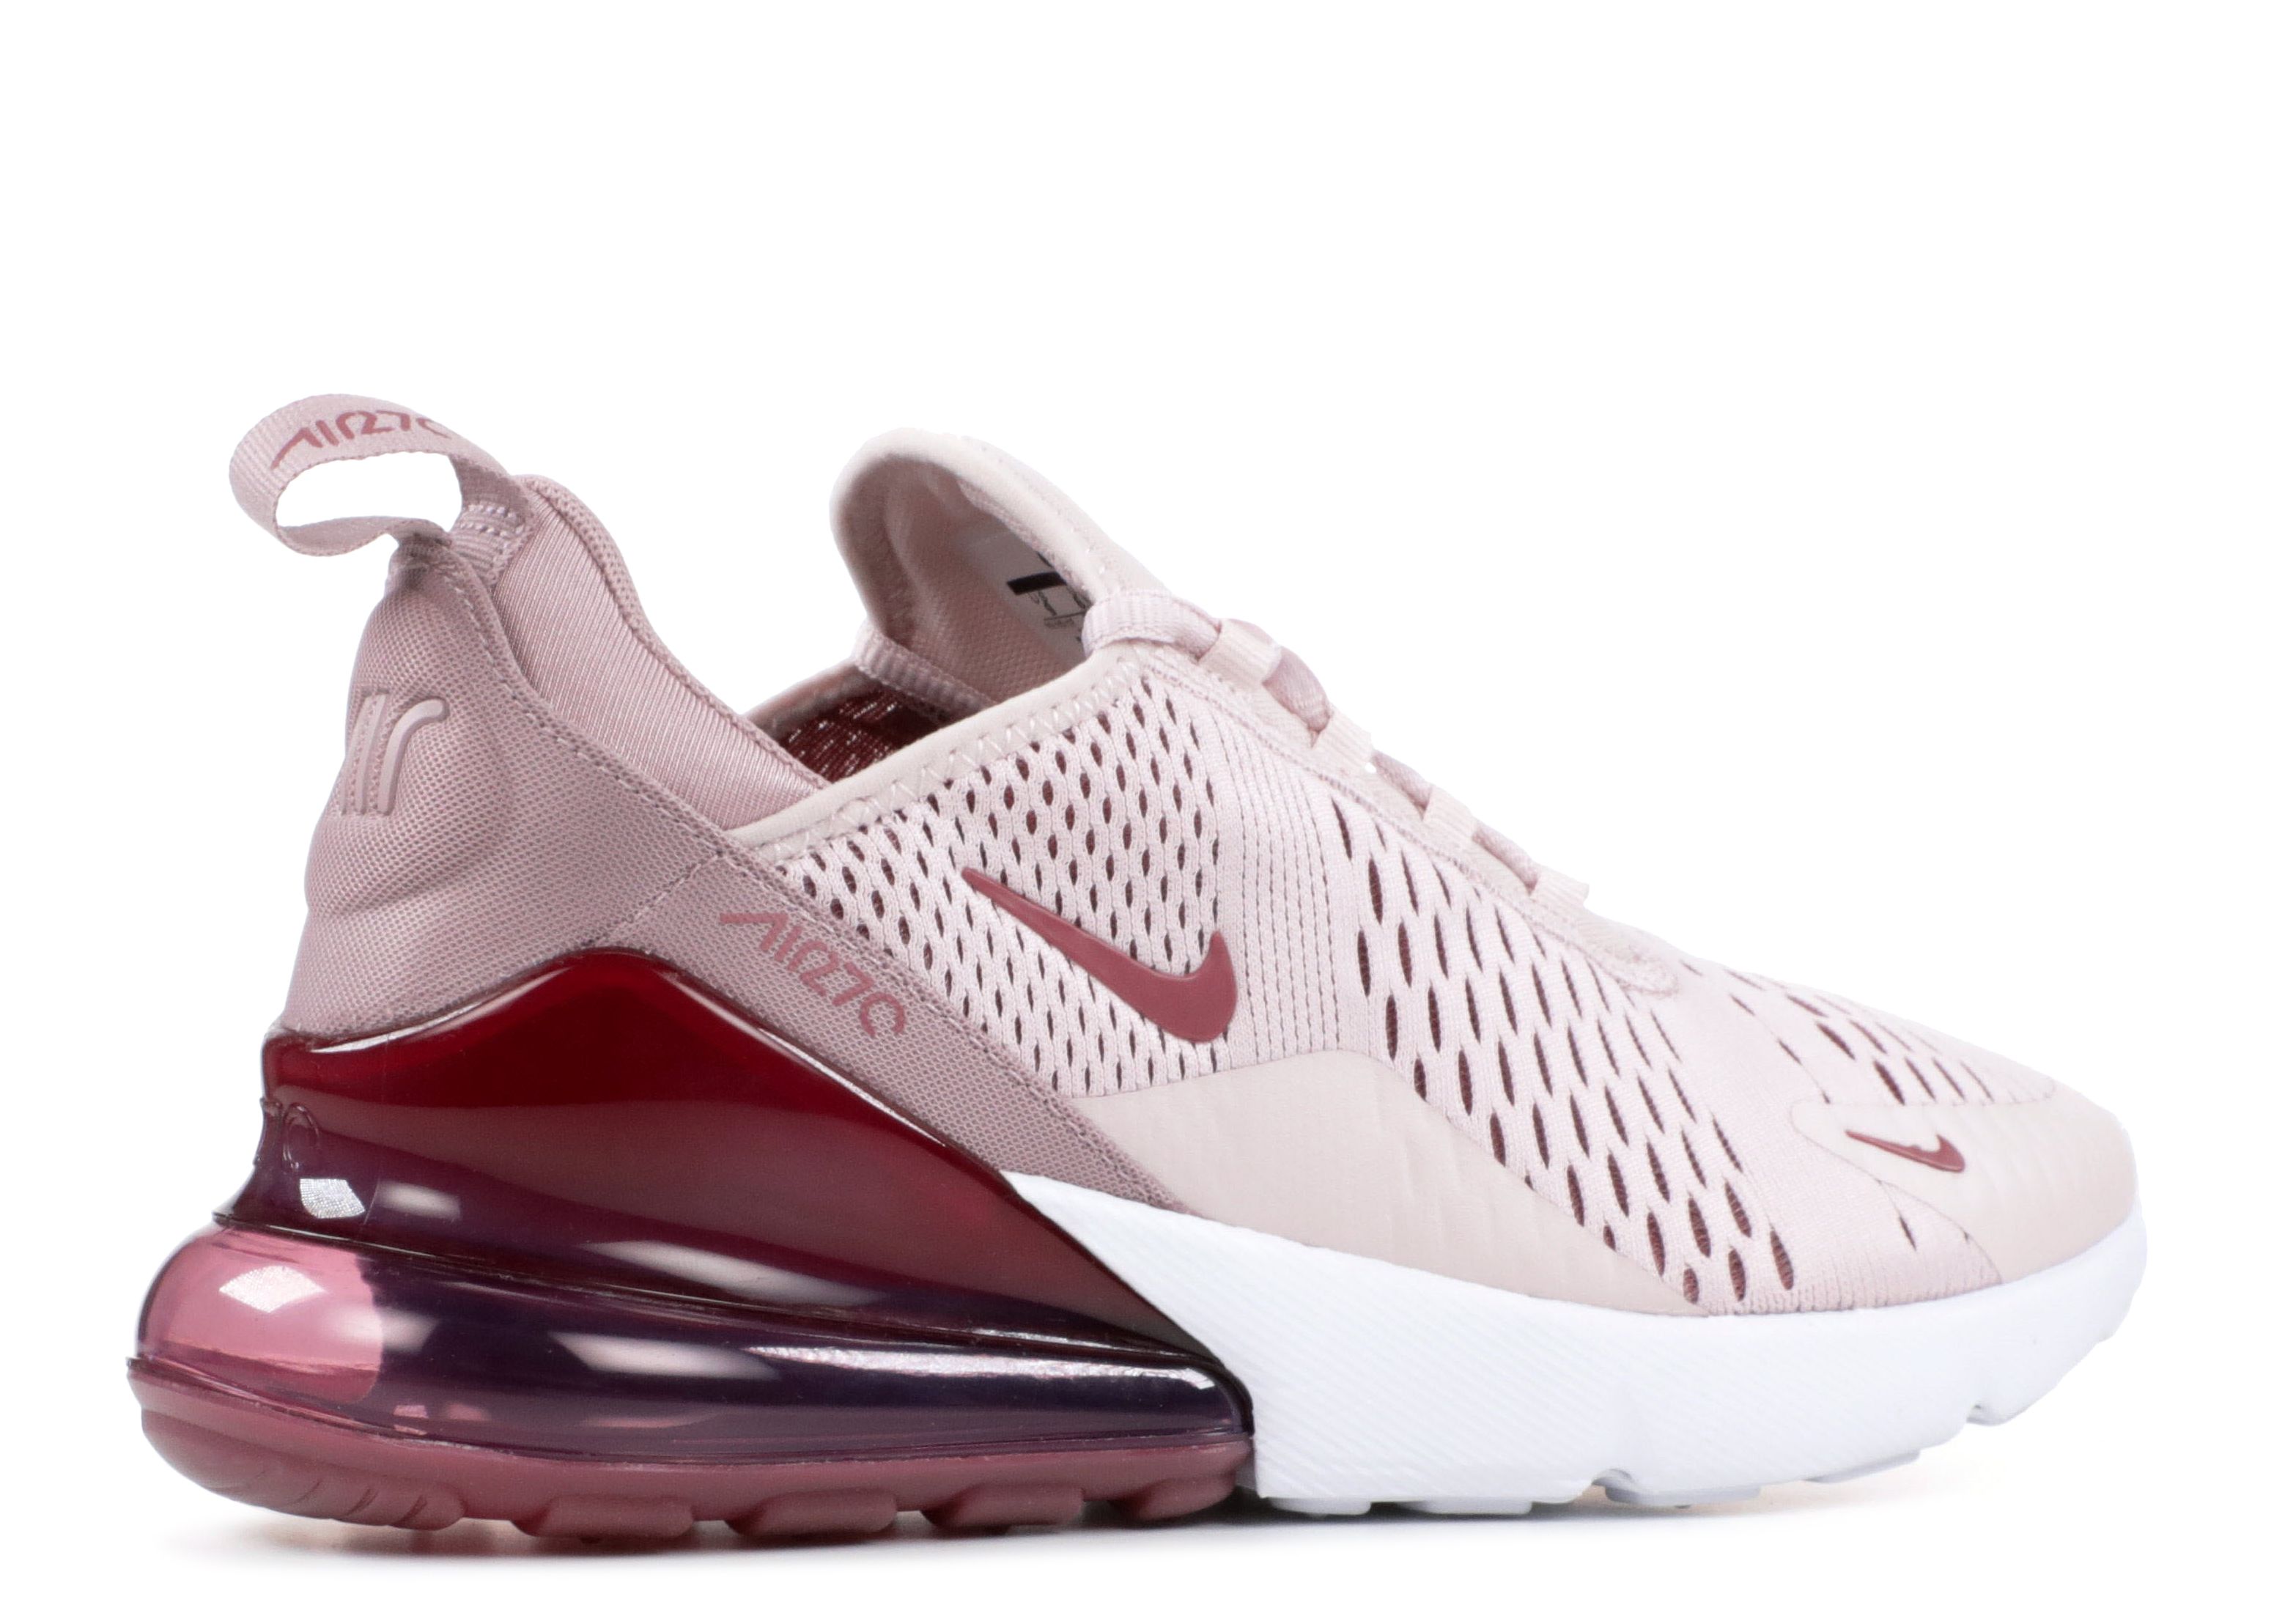 Wmns Air Max 270 Barely Rose Barely Rose Nike Ah6789 601